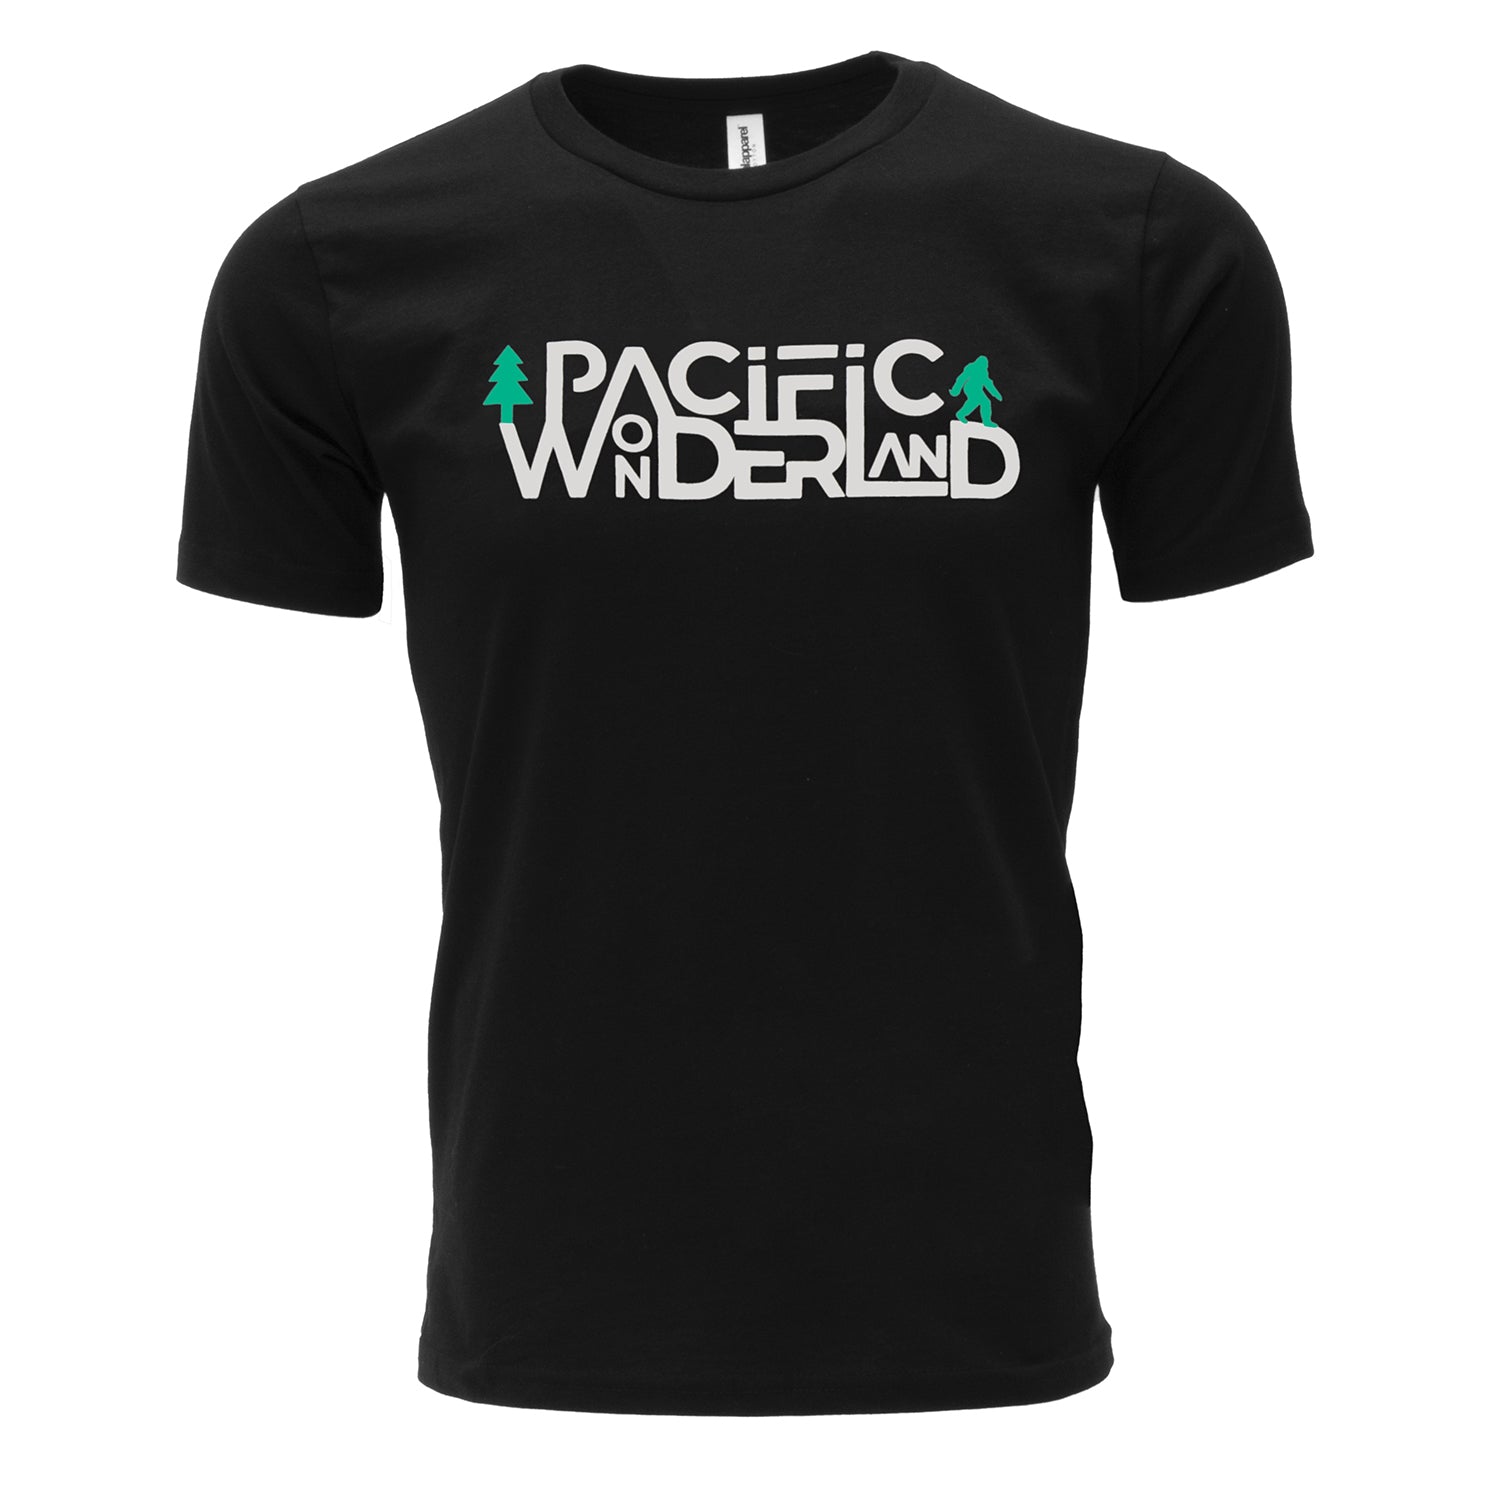 This Pacific Wonderland tee shirt from Oregon also features a small bigfoot and pine tree